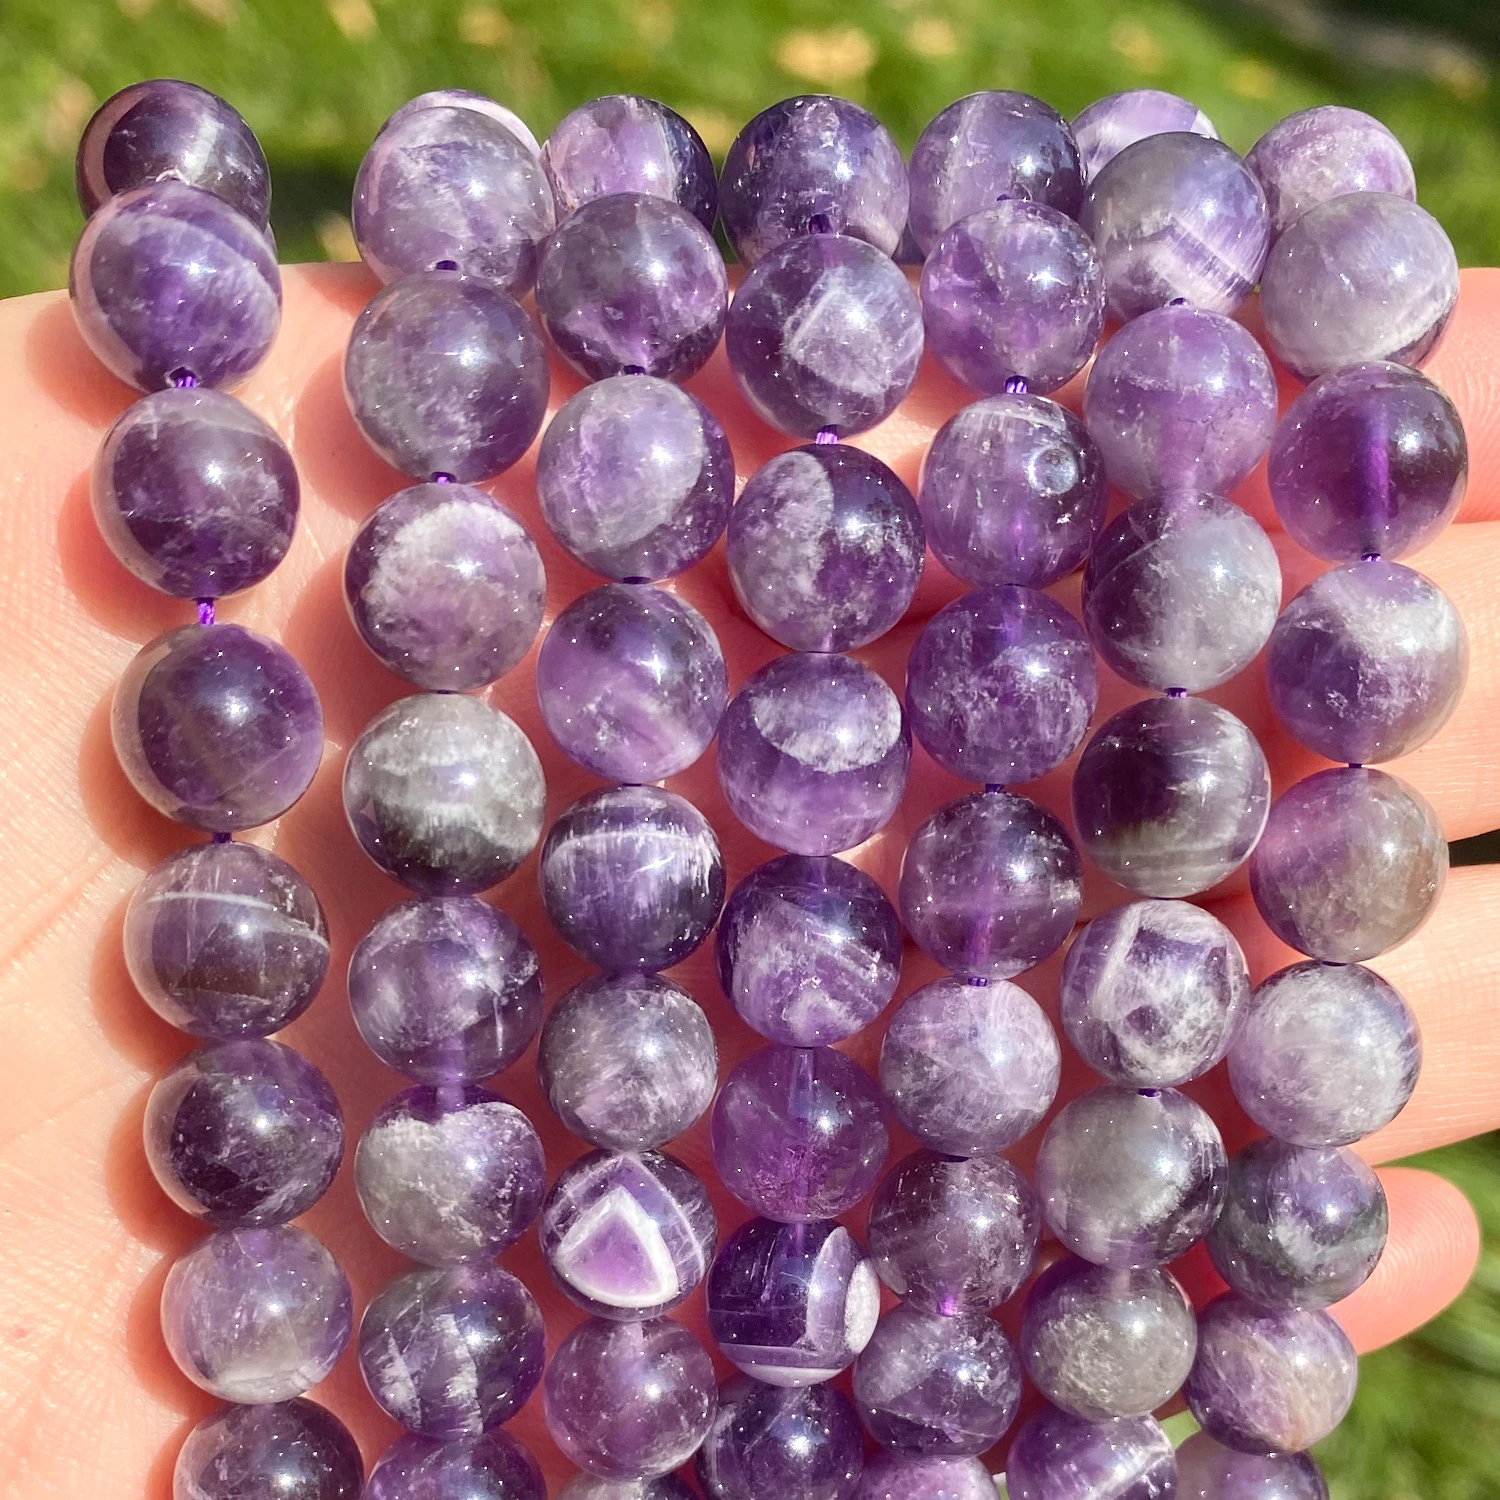 Natural Purple Amethyst Round Stone Beads For Jewelry Making Free Shipping 15"